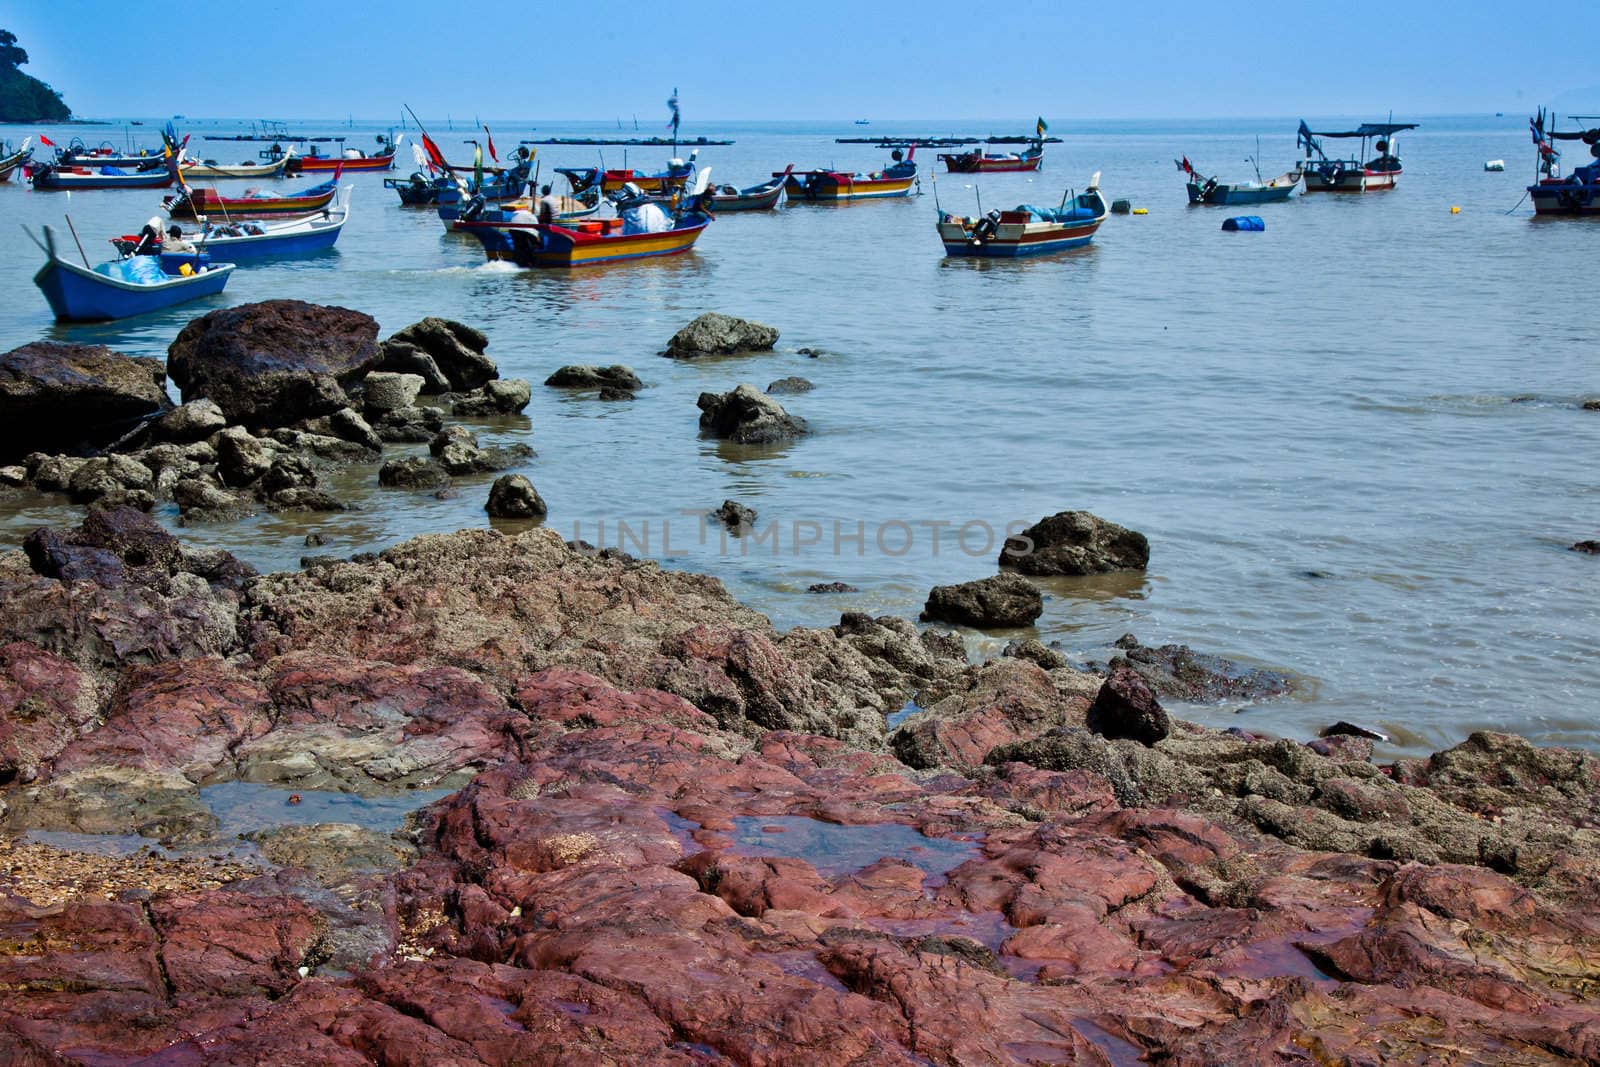 A view of Malaysian fishing boats with rock formations in the foreground